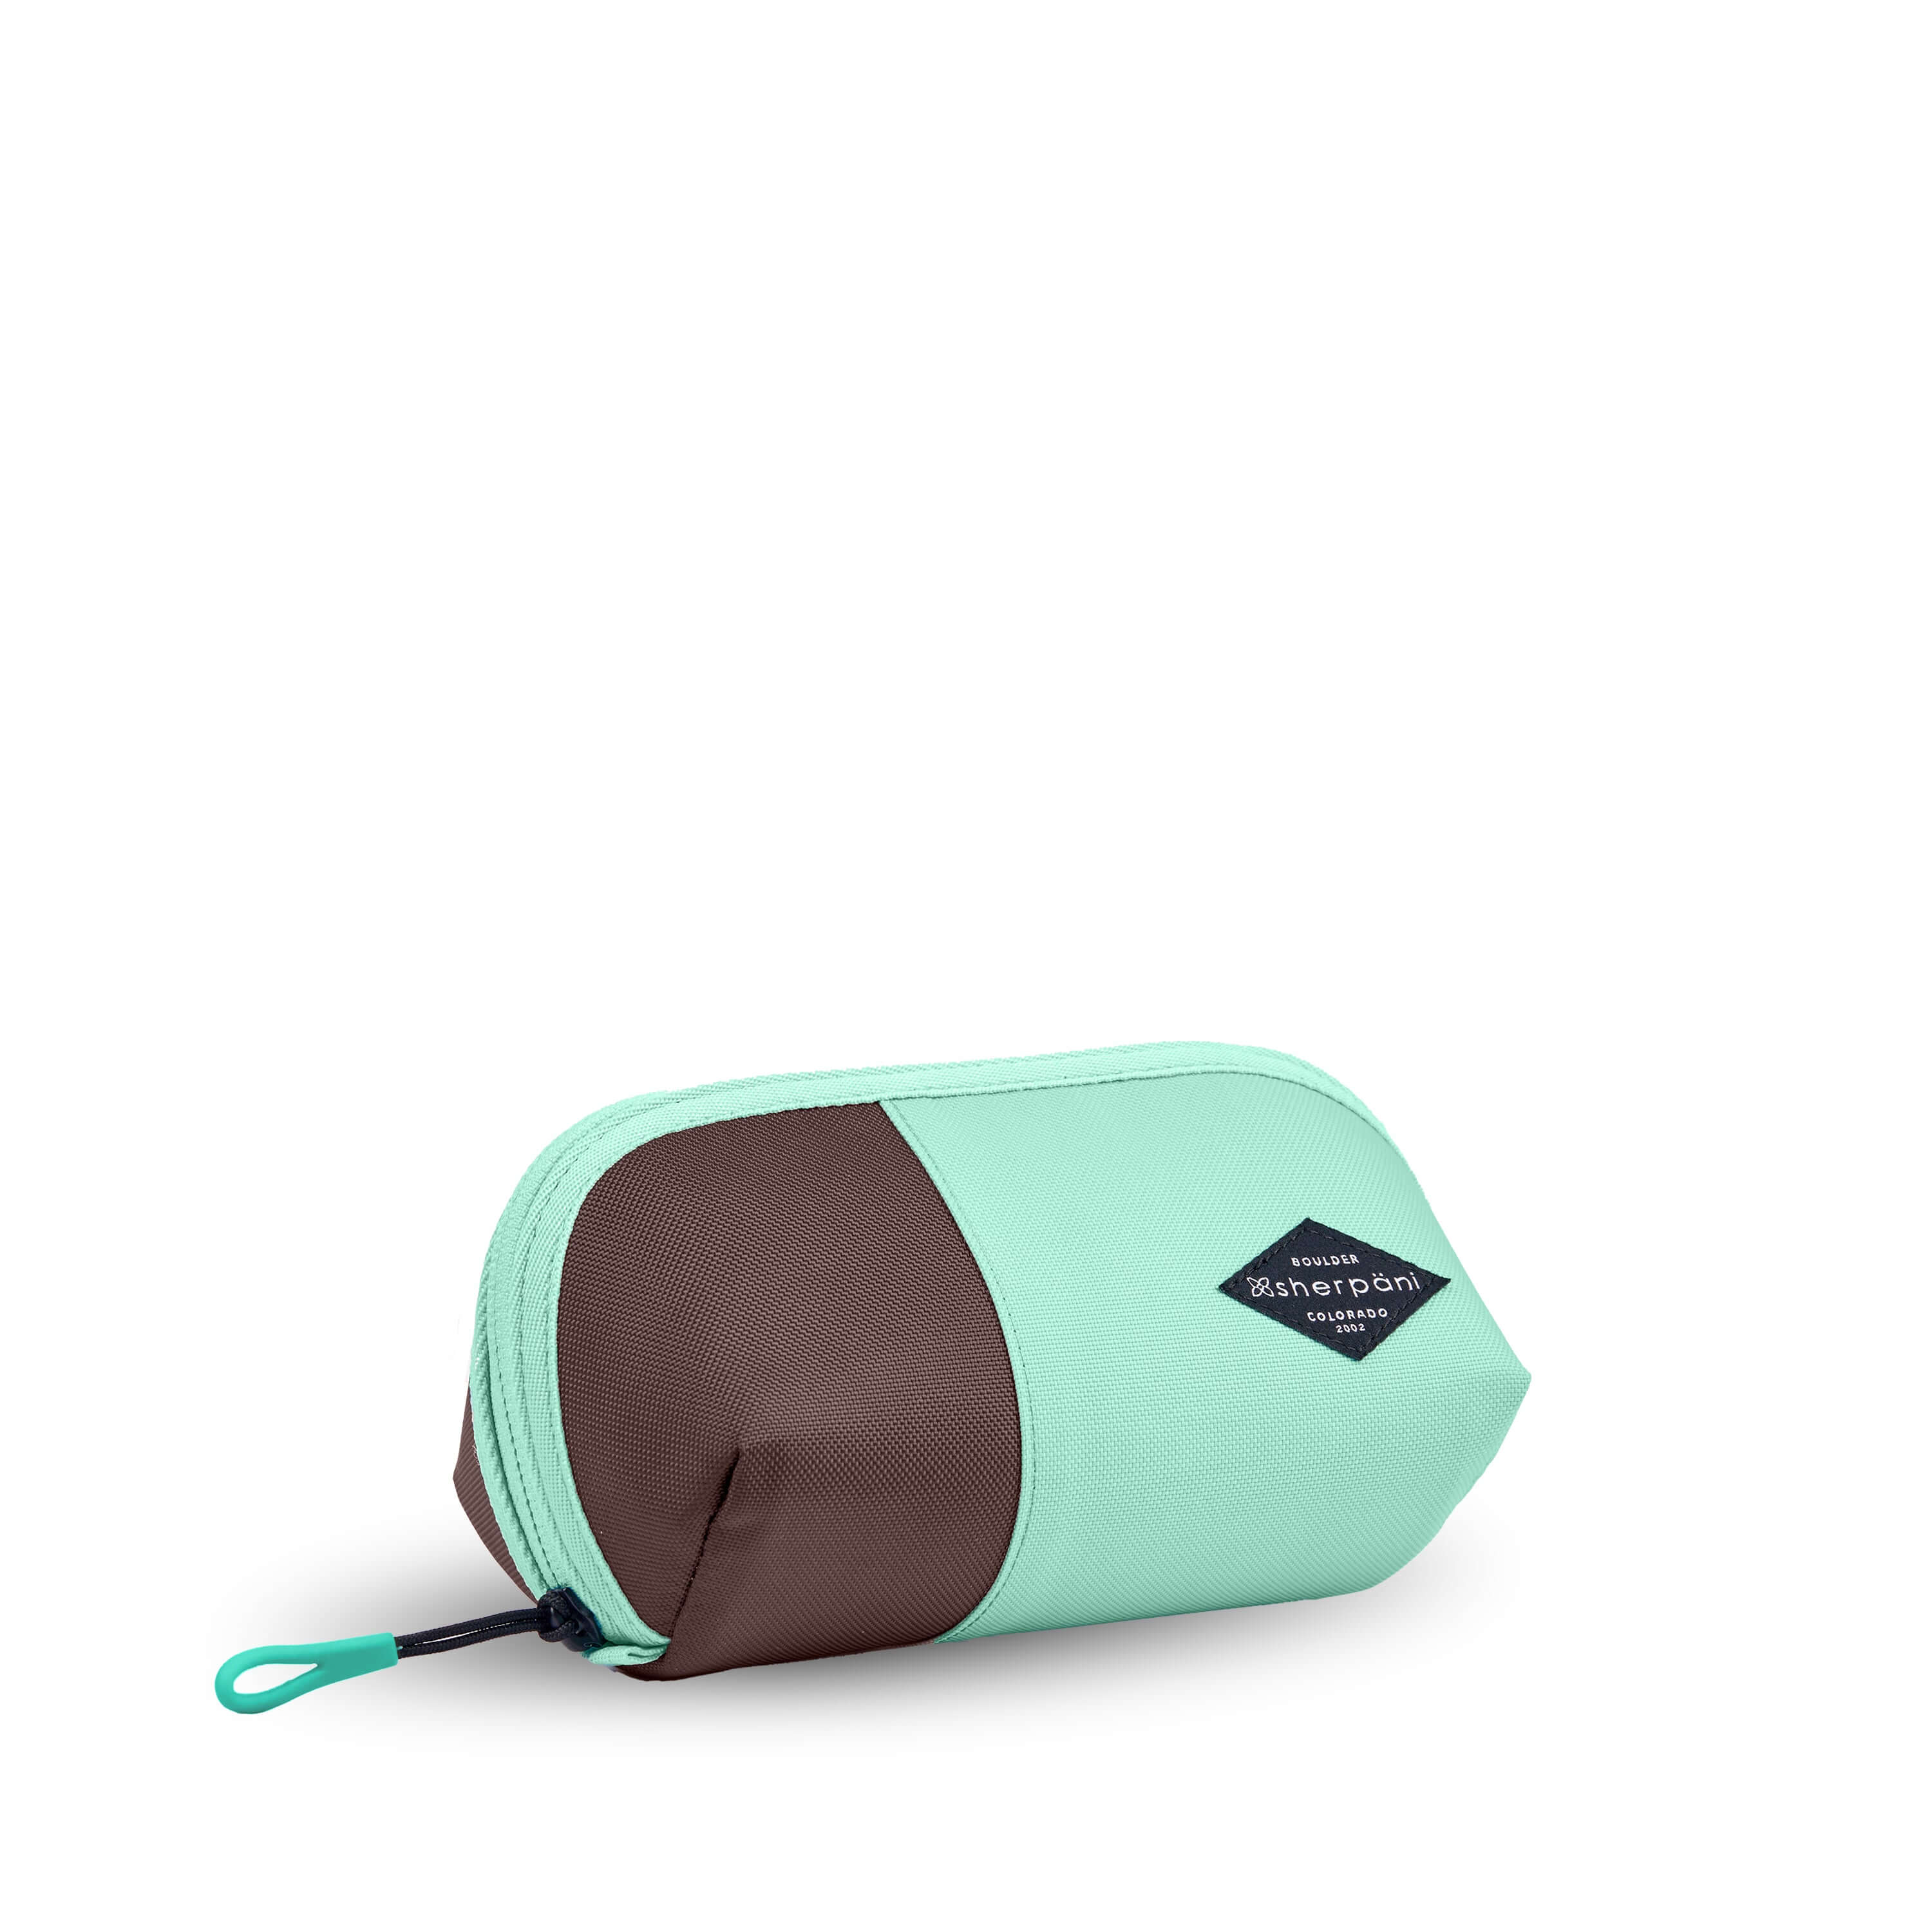 Angled front view of Sherpani travel accessory, the Harmony in Seagreen. The pouch is two-toned in light green and brown. It has an easy-pull zipper that is accented in light green. 